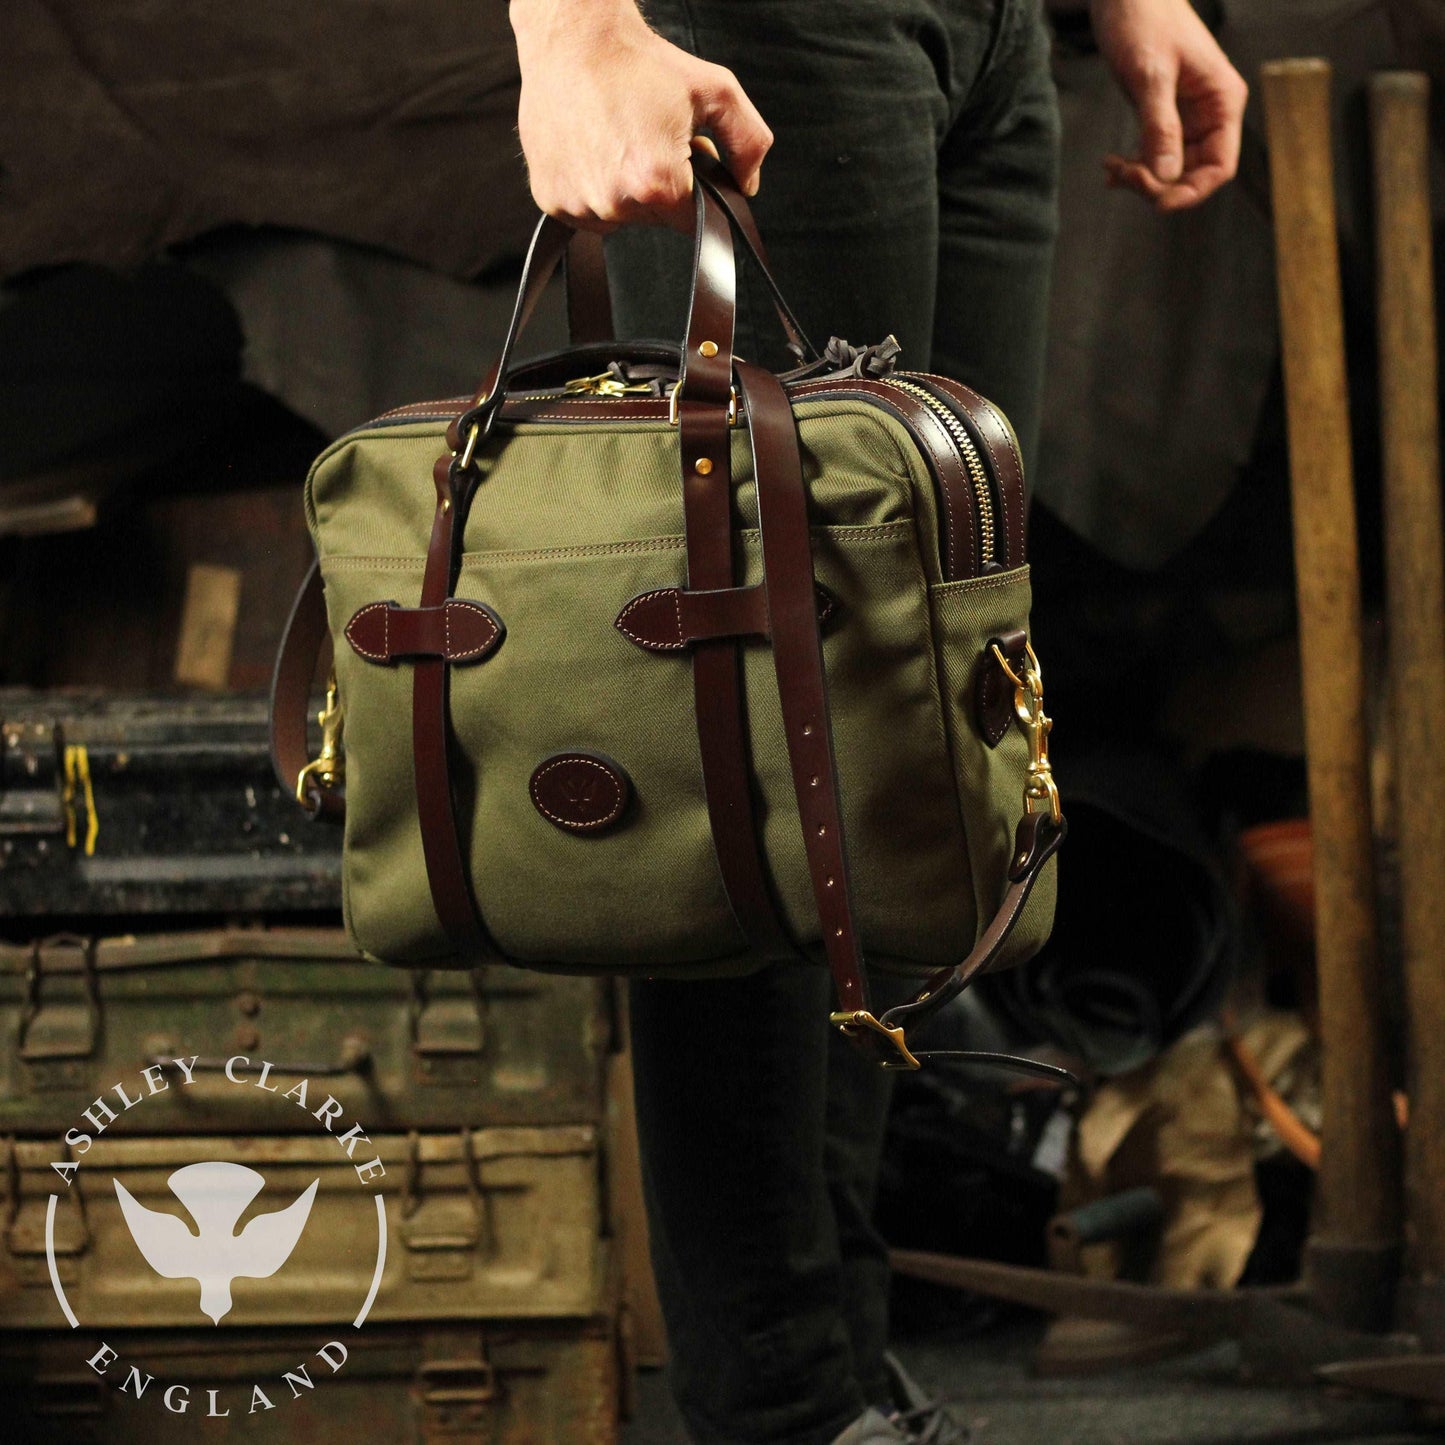 green waxed canvas briefcase by ashley clarke england being carried by a person